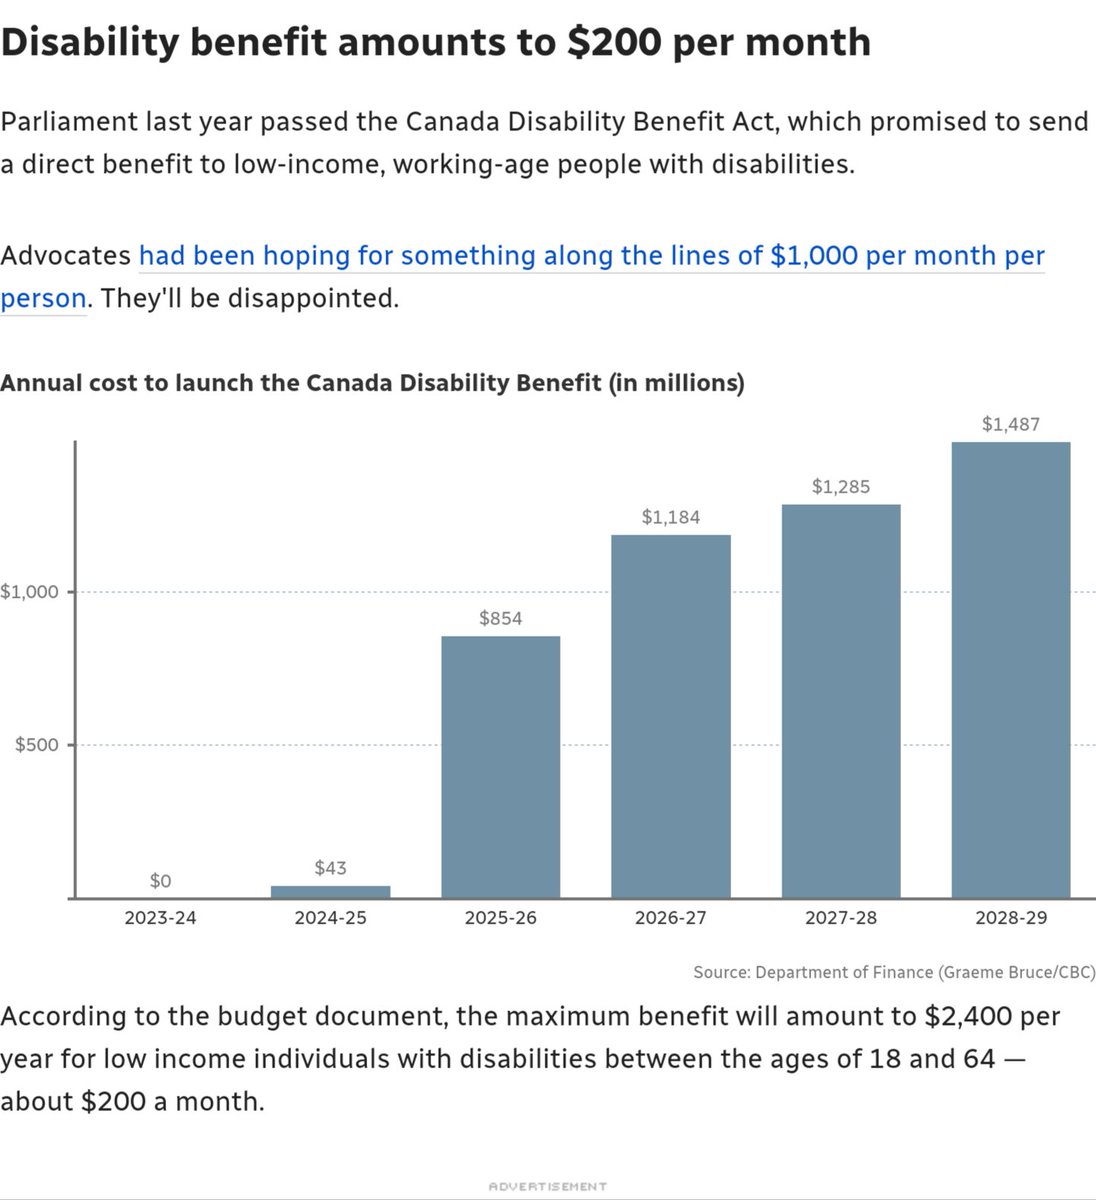 Well, they totally screwed us, #NotMyBudget, they planned this without us, they funded it without consideration, this benefit is empty and void, likely every cent will be clawed back. This is the ultimate failure. What an atrocity. No fairness here, done without us and will…